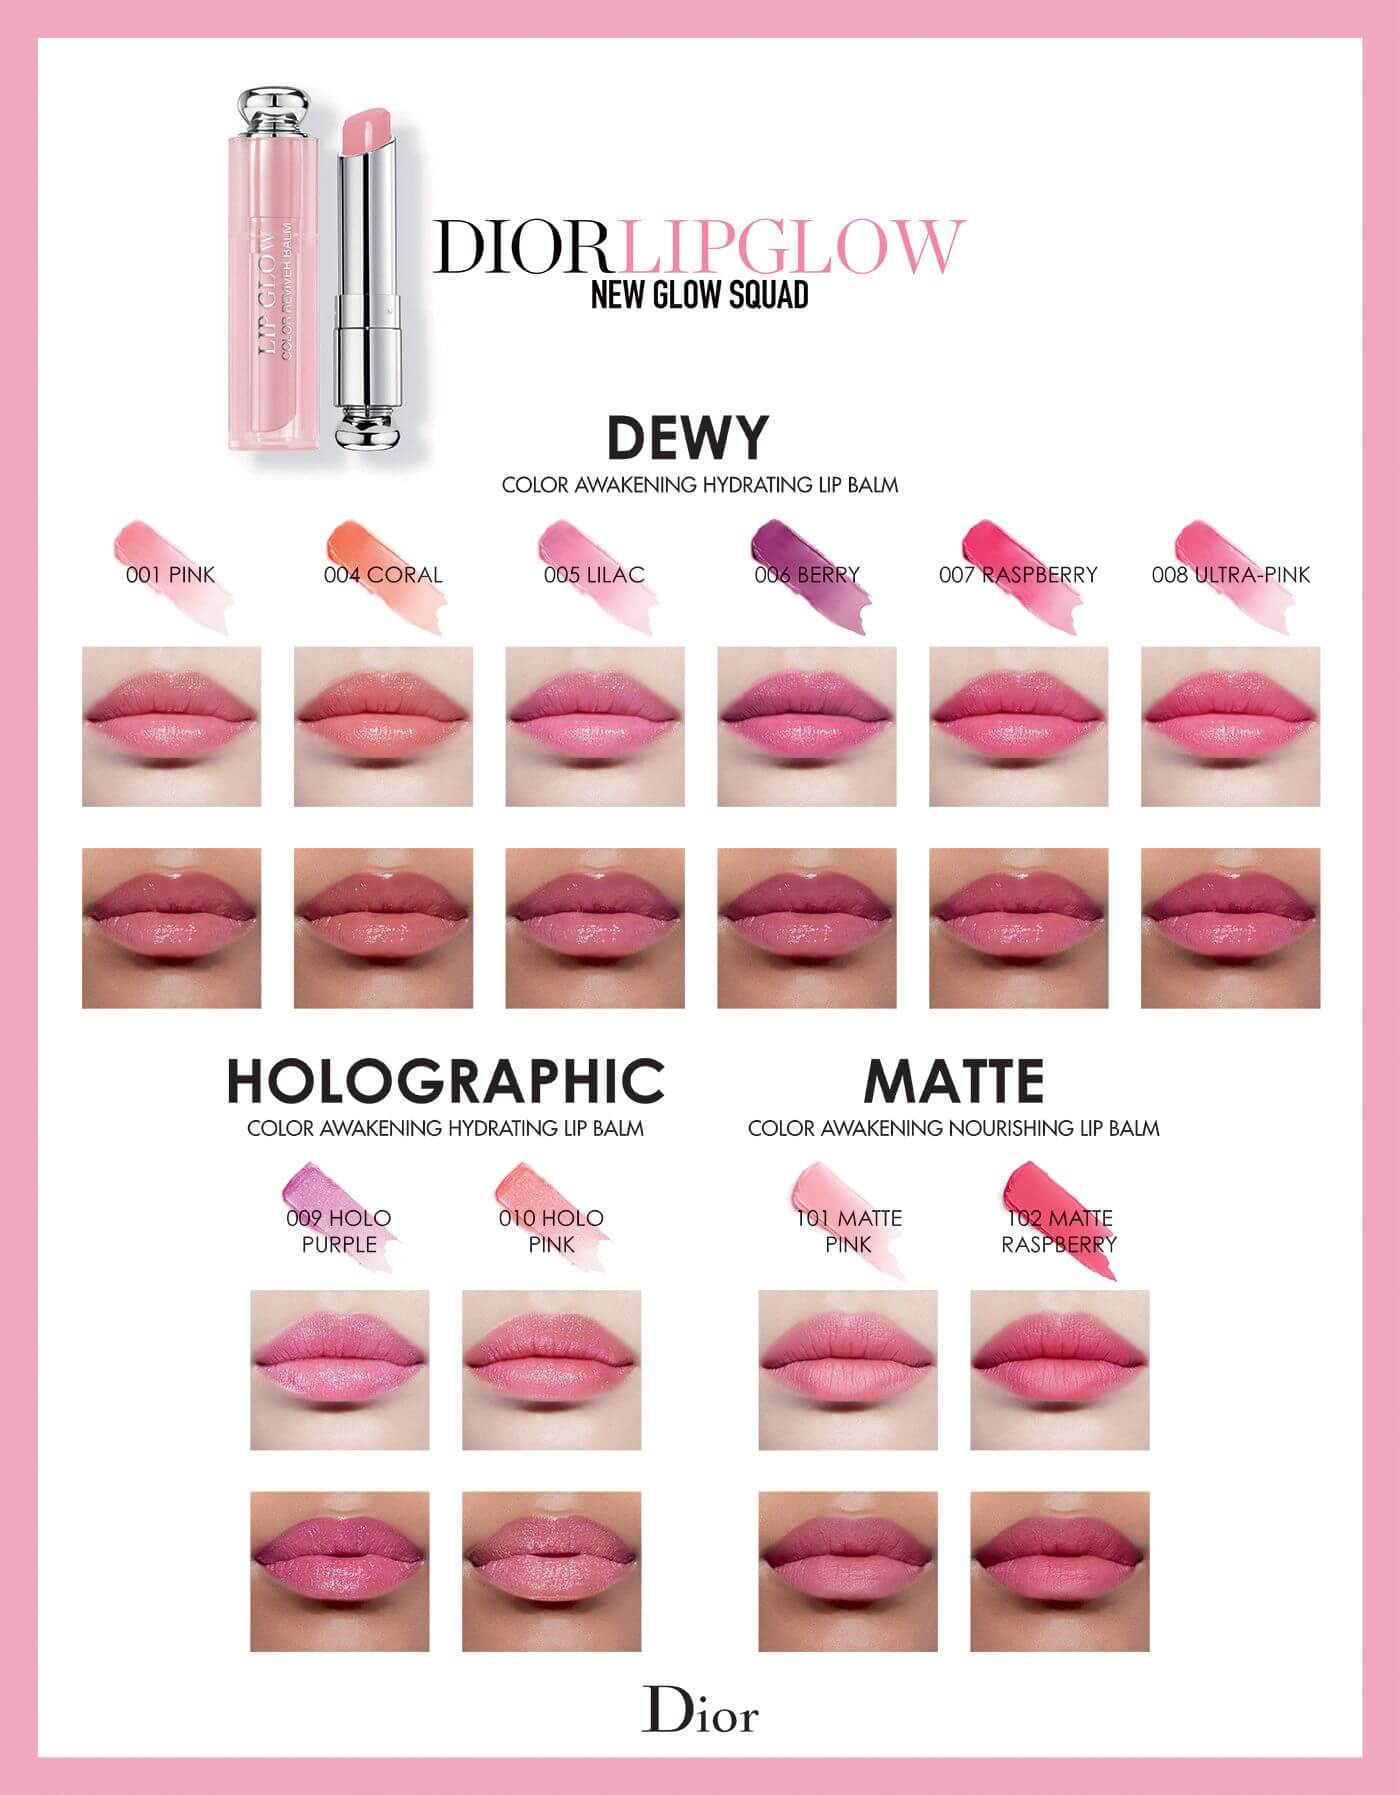 Dior Addict Lip Glow Oil Review  See Photos  Allure